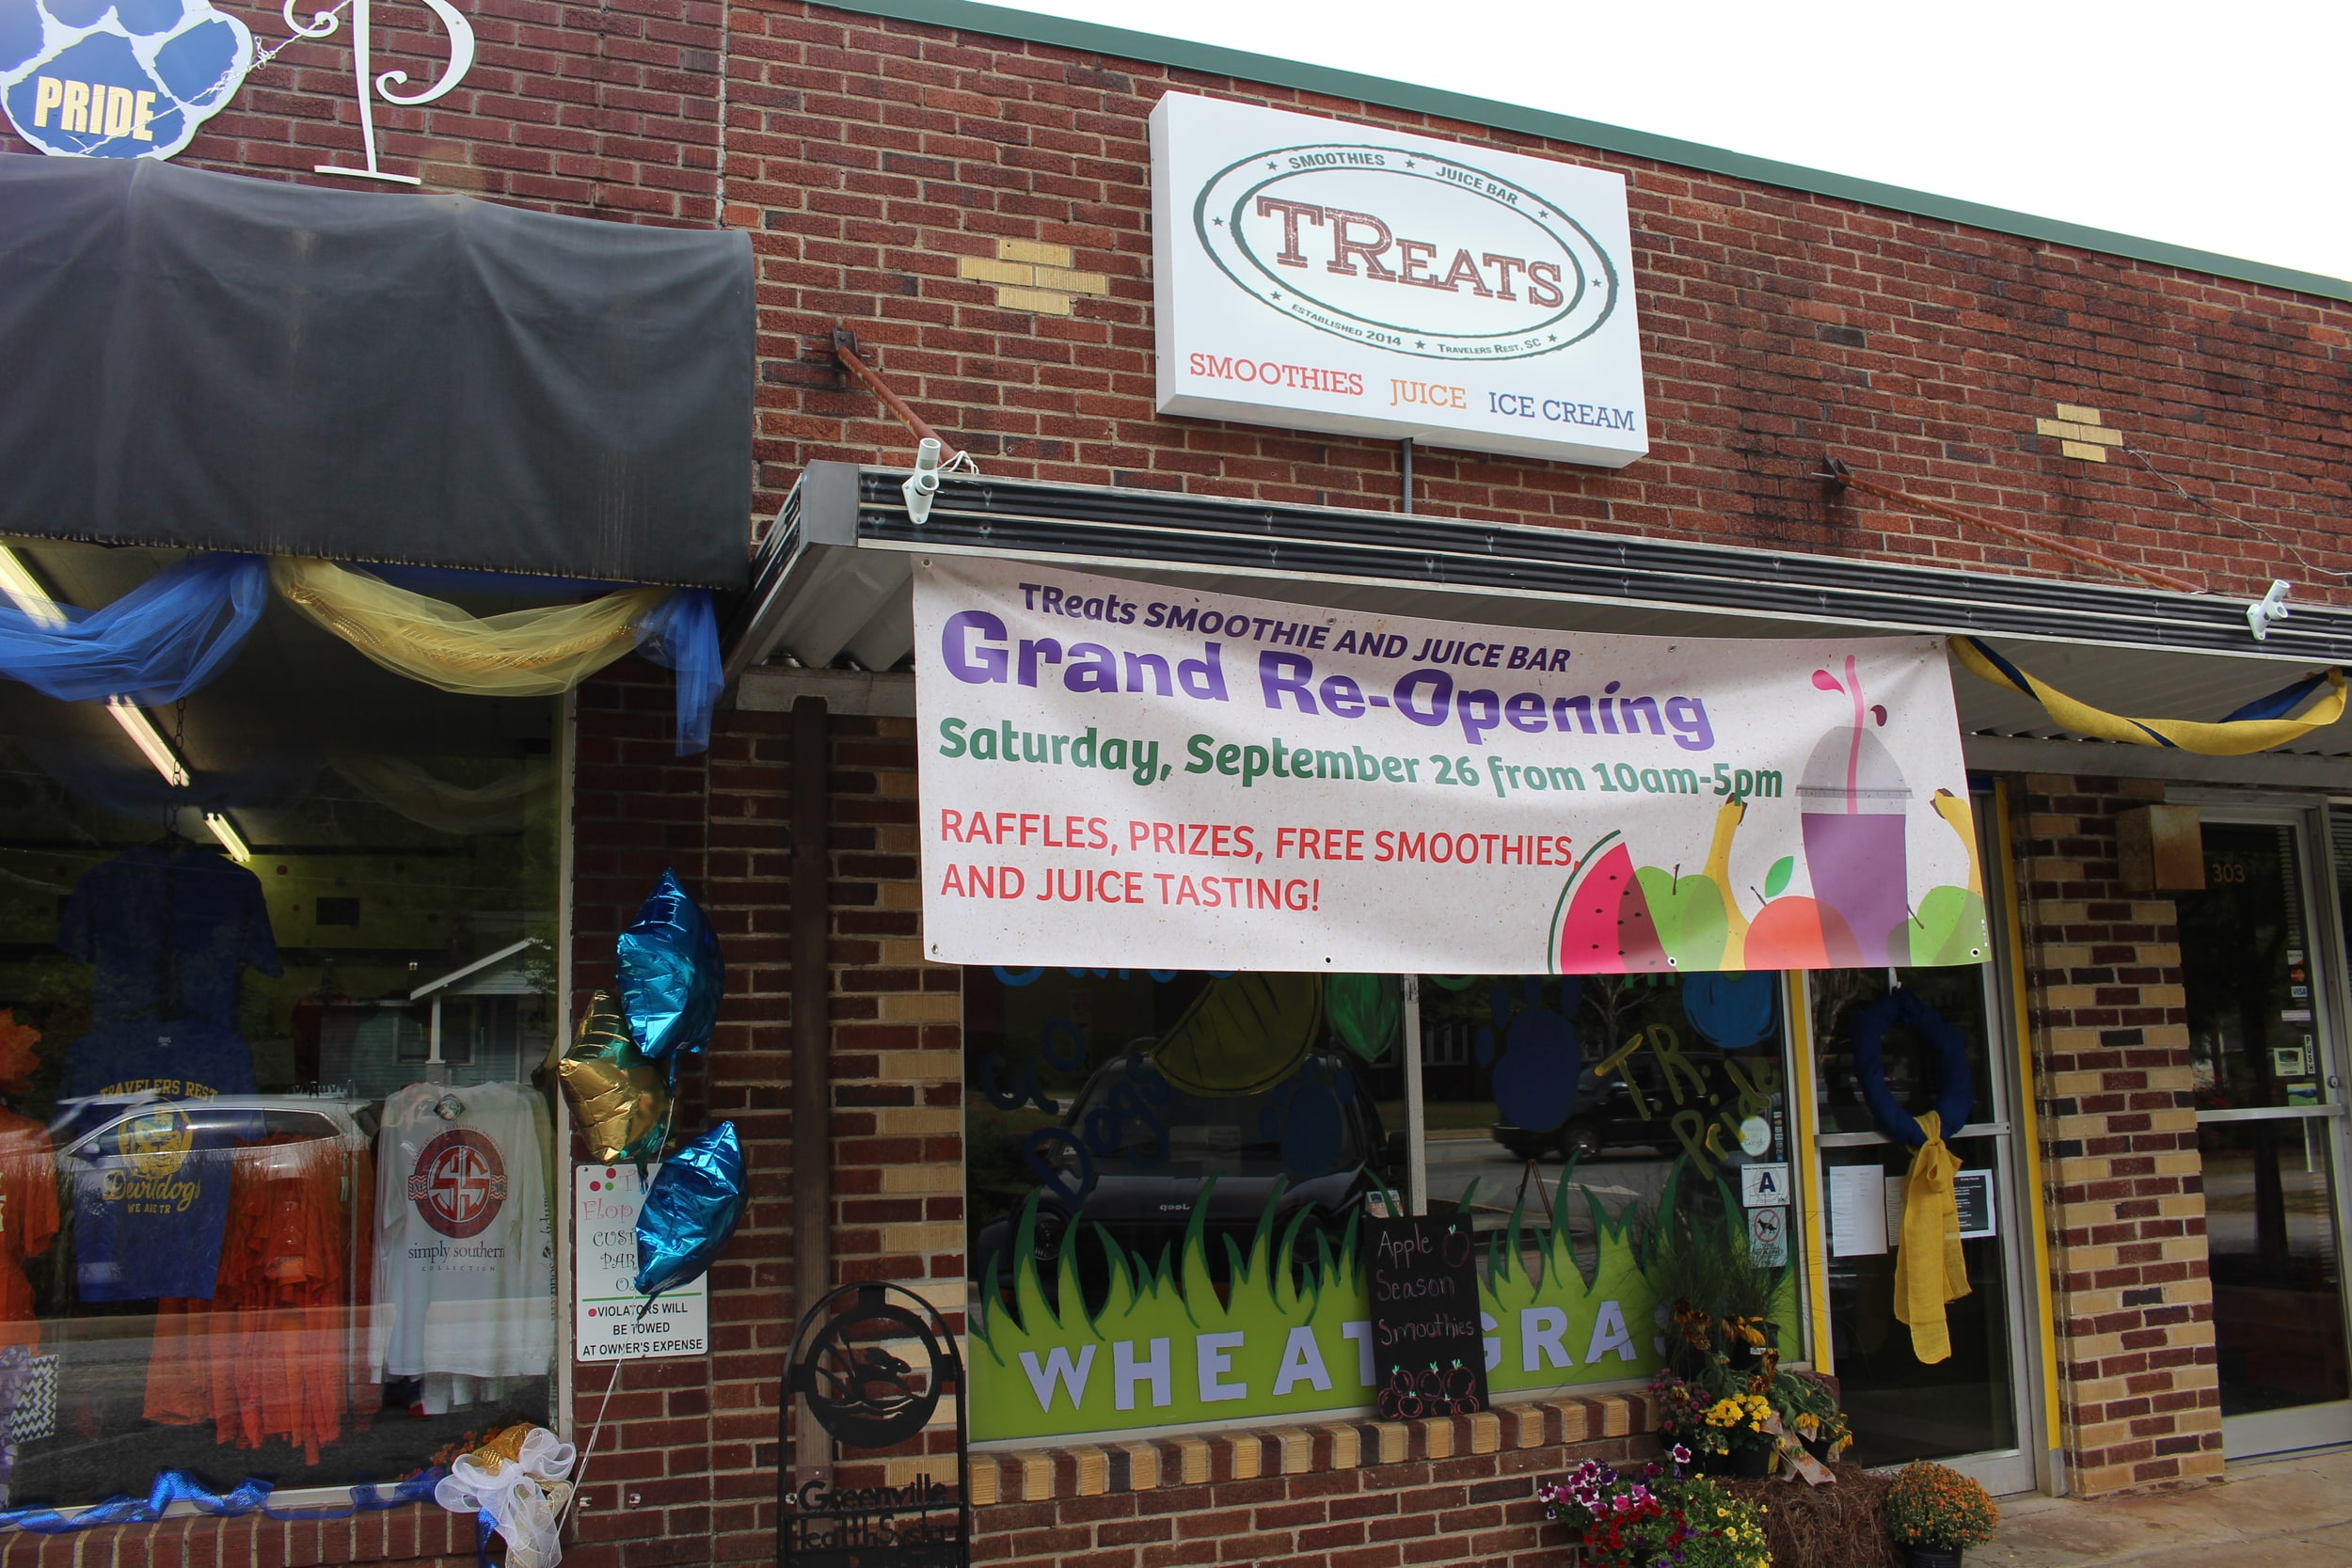 TReats is located at 305 S. Main St. in Travelers Rest.